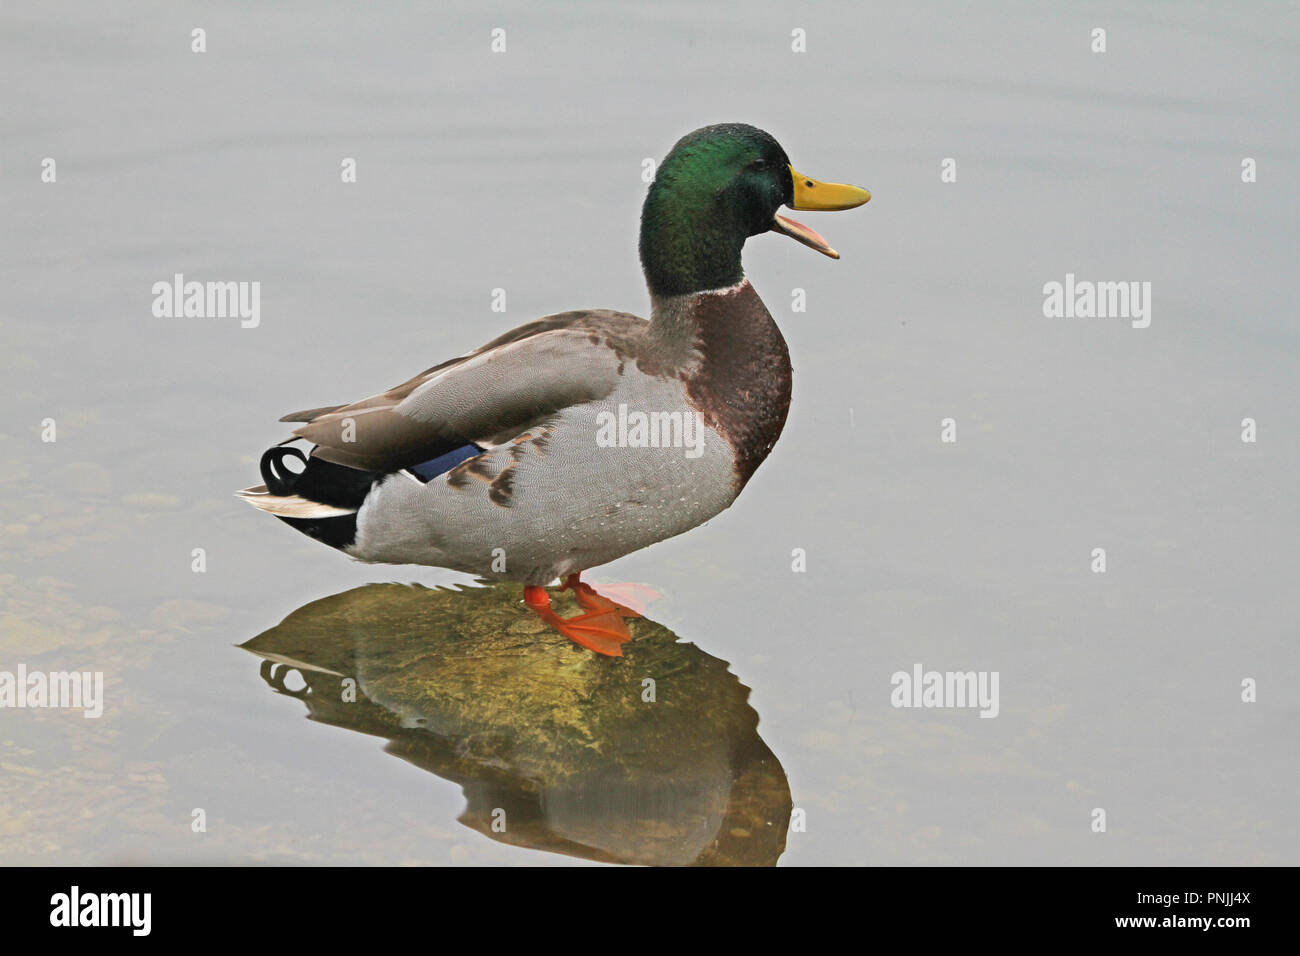 male mallard or duck or drake close up Latin name Anas platyrhynchos quacking standing in the water with orange feet in Portonovo near Ancona Italy Stock Photo